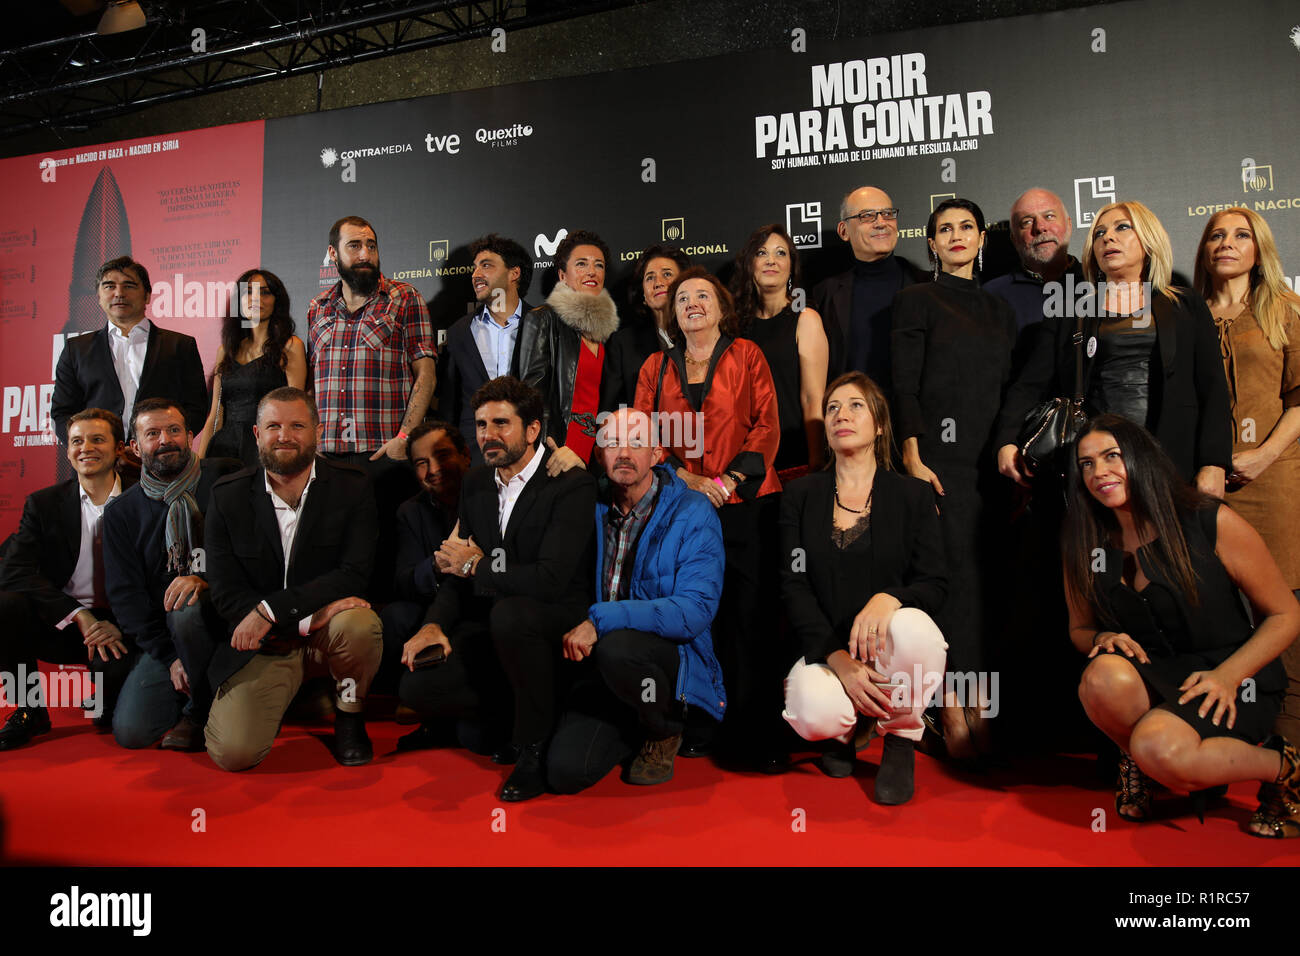 Madrid, Spain. 13th Nov, 2018. The premiere of the Official Section of the documentary MORIR PARA CONTAR at the Madrid Premiere Week. Hernán Zin, the director, interviews other journalists and asks them about their traumas, their losses, their fears and their families on Nov 13, 2018 in Madrid, Spain Credit: Jesús Hellin/Alamy Live News Stock Photo